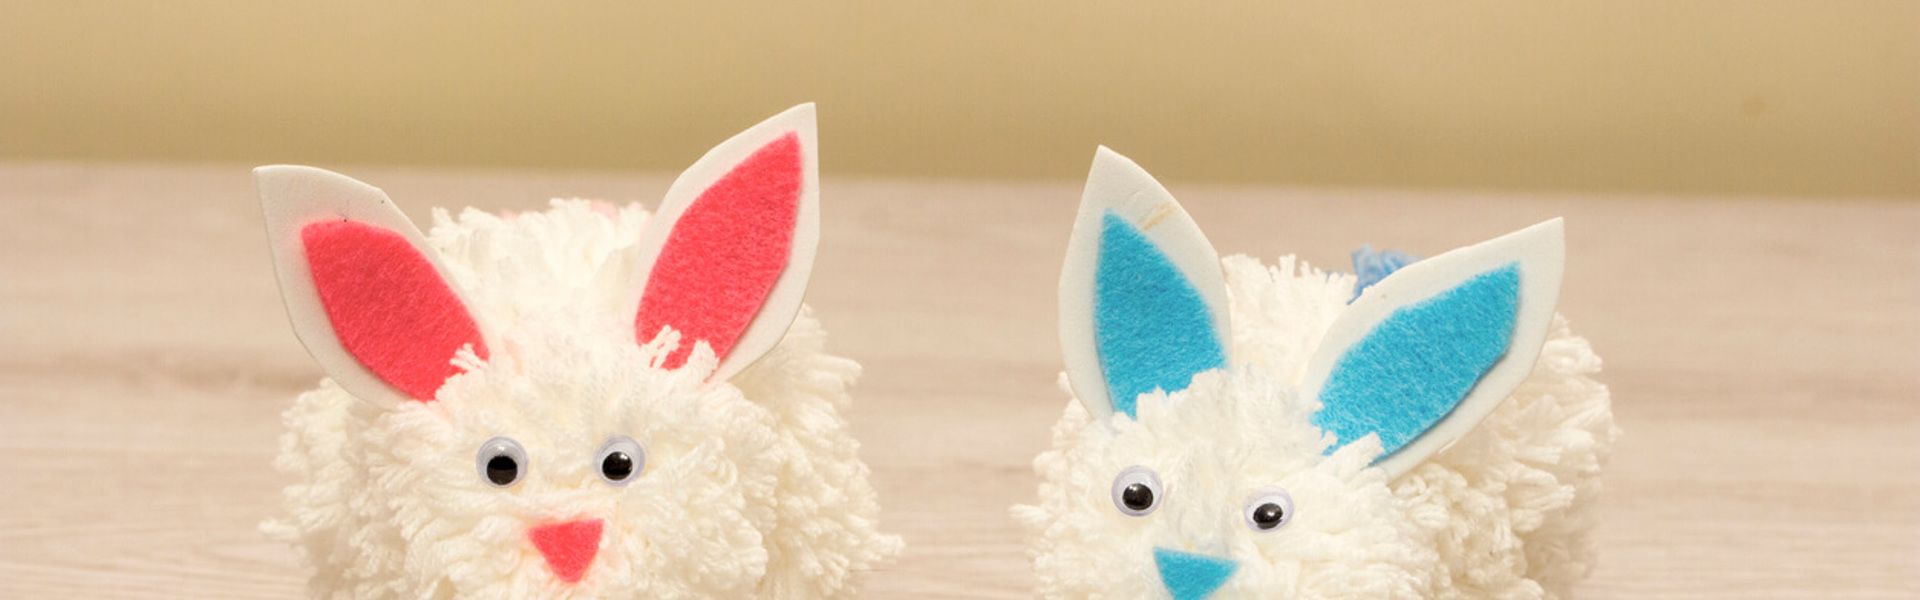 white pompom bunnies with blue and pink felt ears on a wooden table